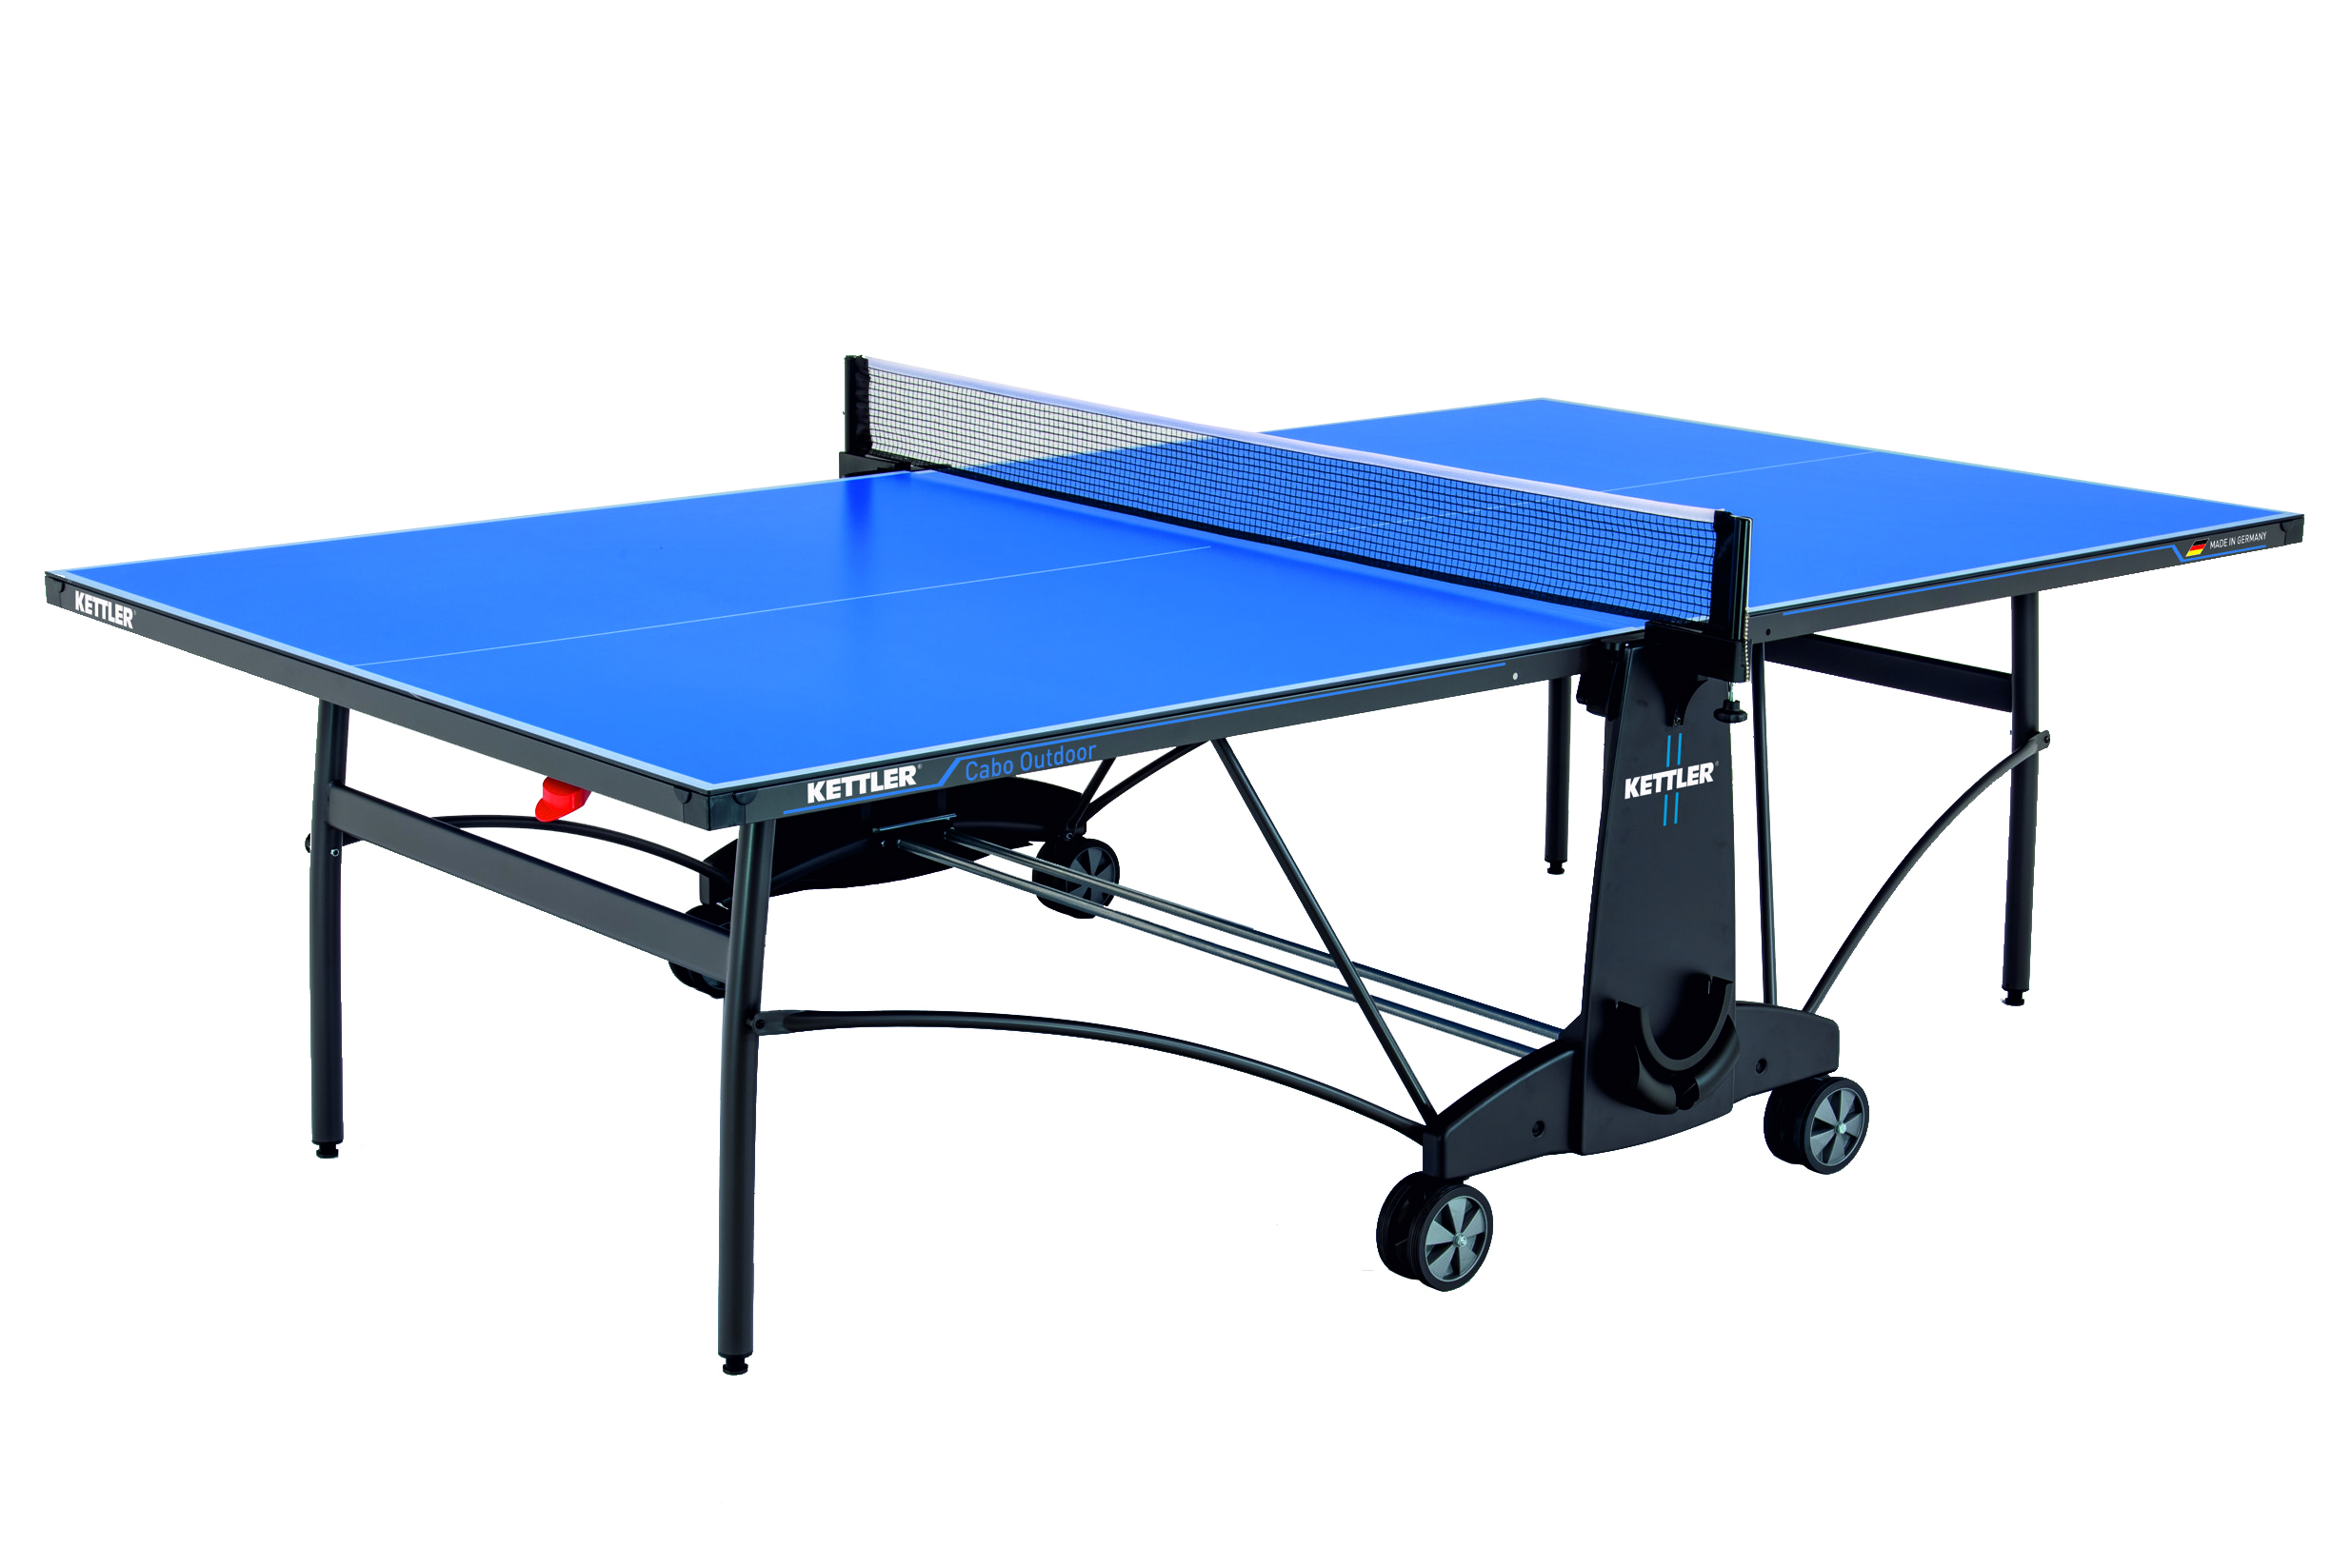 Cornilleau Premium Polyester Table Tennis Table Cover